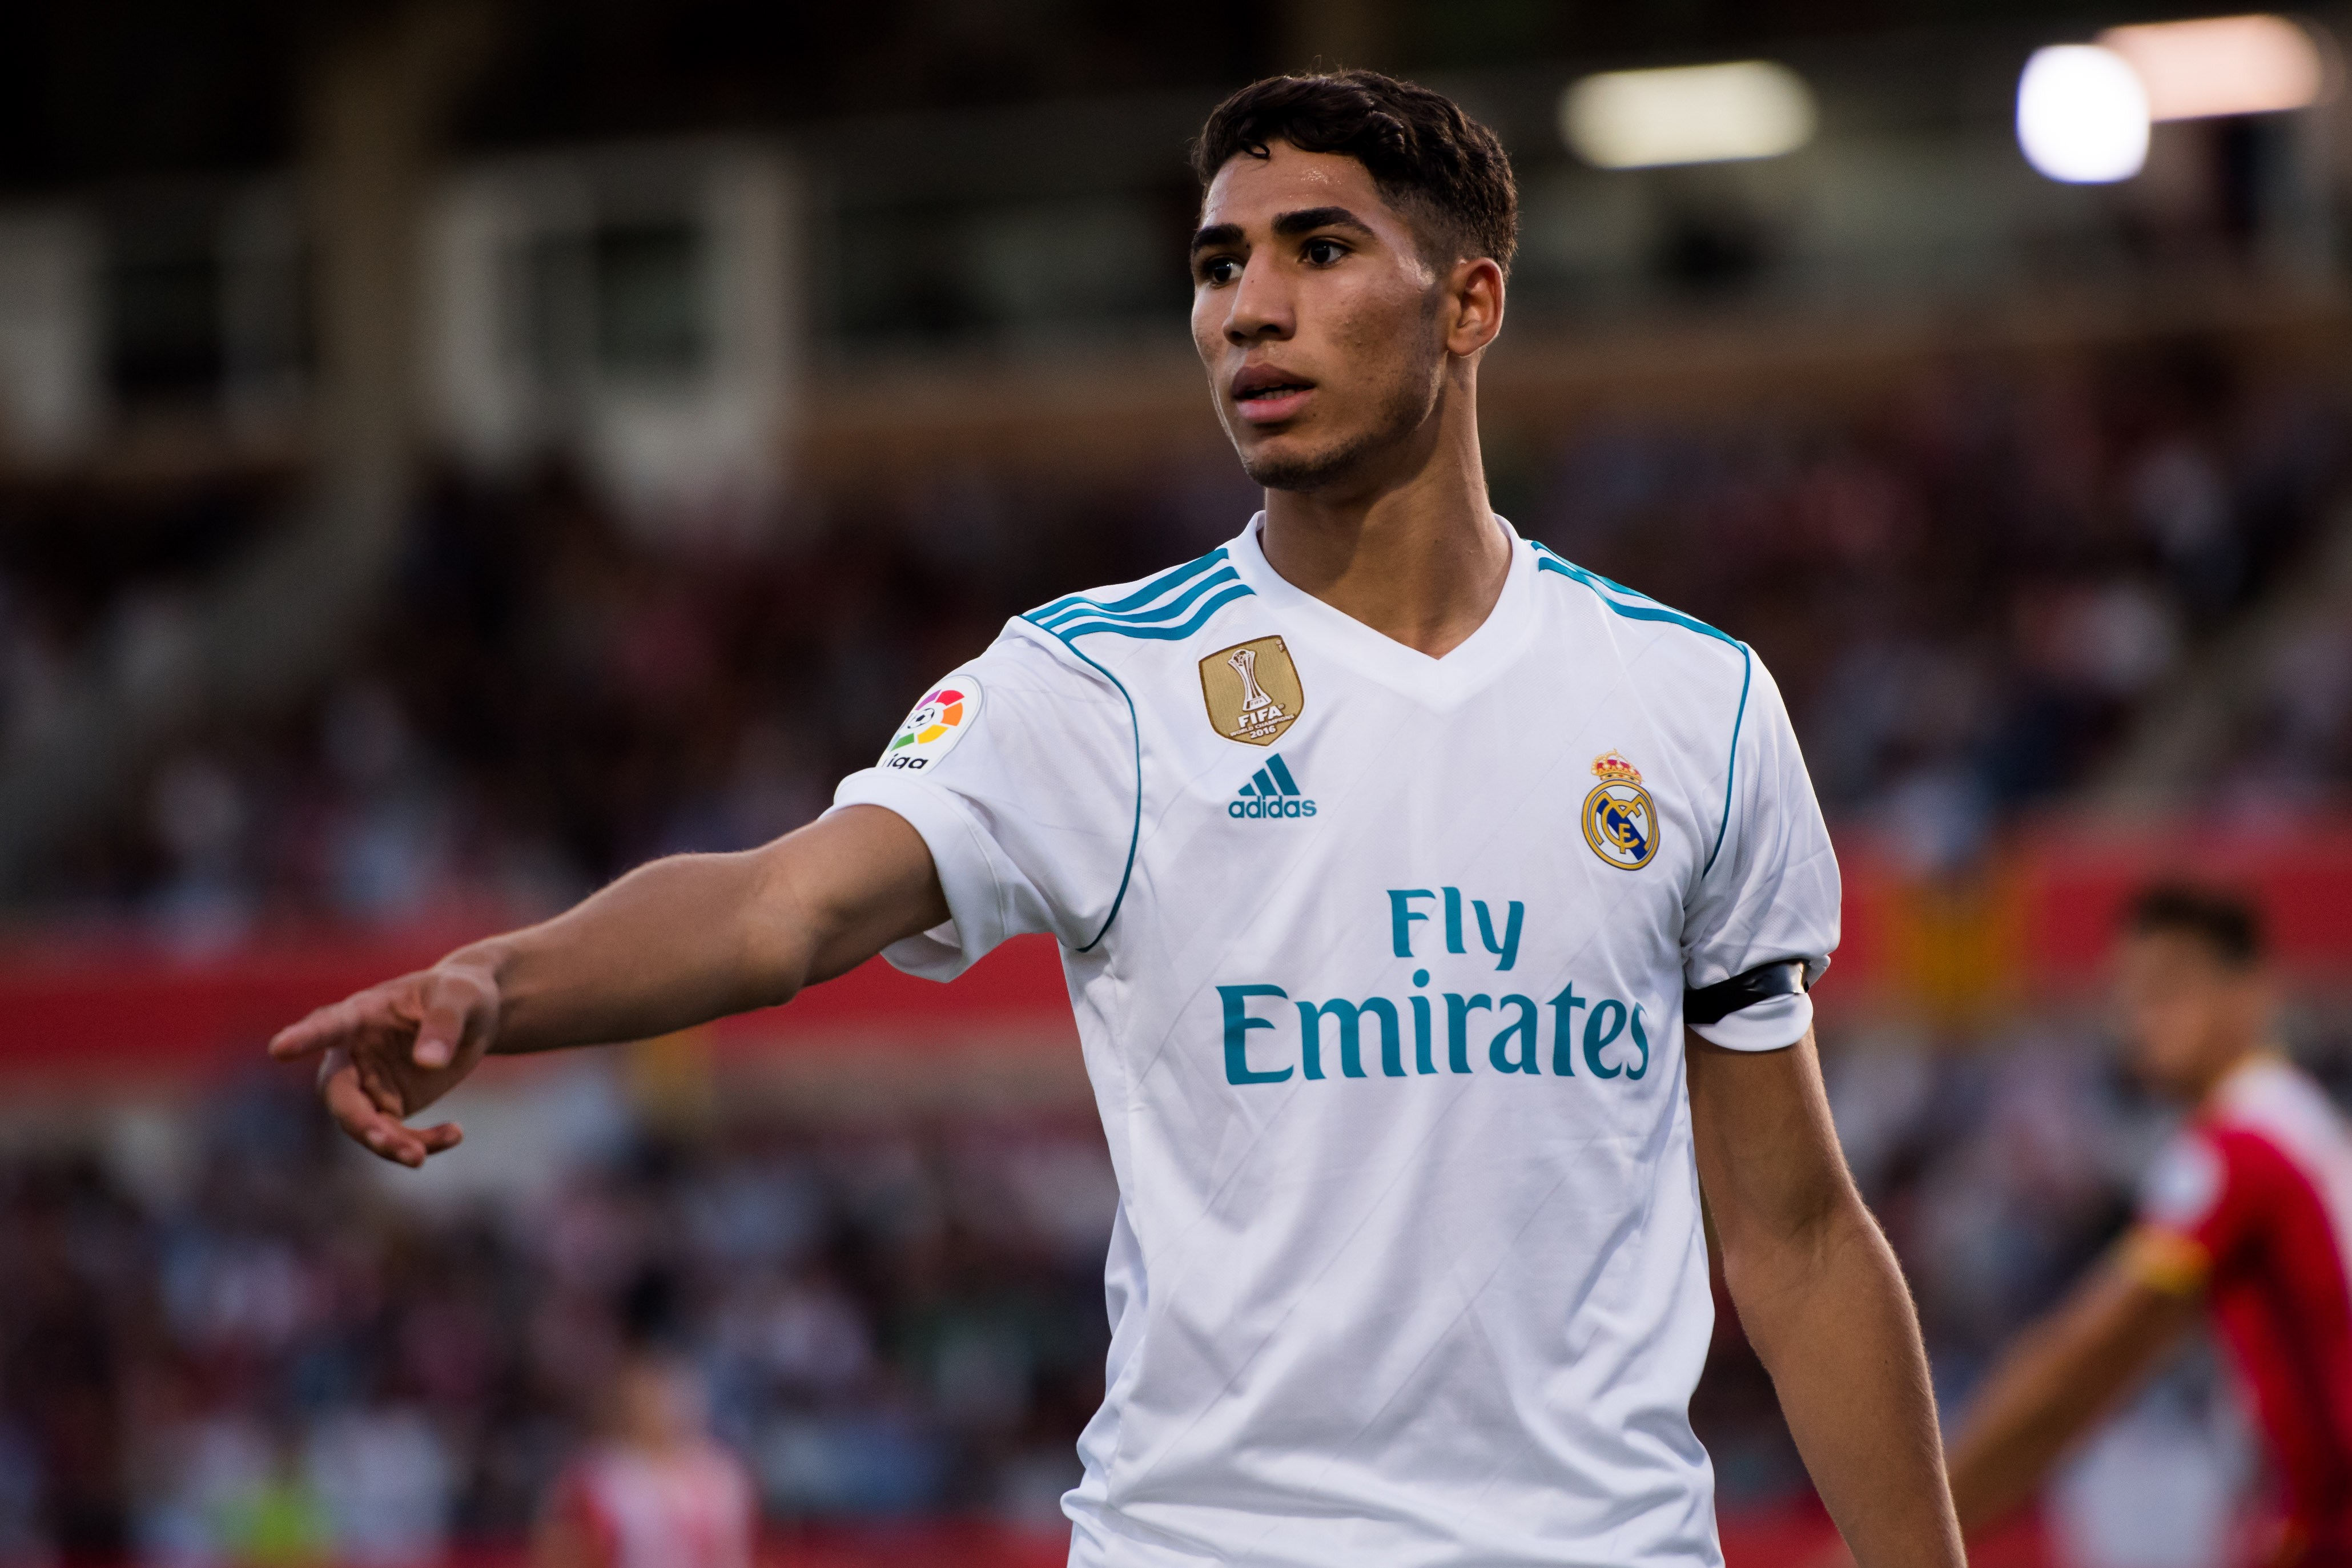 GIRONA, SPAIN - OCTOBER 29: Achraf Hakimi of Real Madrid CF gestures during the La Liga match between Girona and Real Madrid at Estadi de Montilivi on October 29, 2017 in Girona, Spain. (Photo by Alex Caparros/Getty Images)